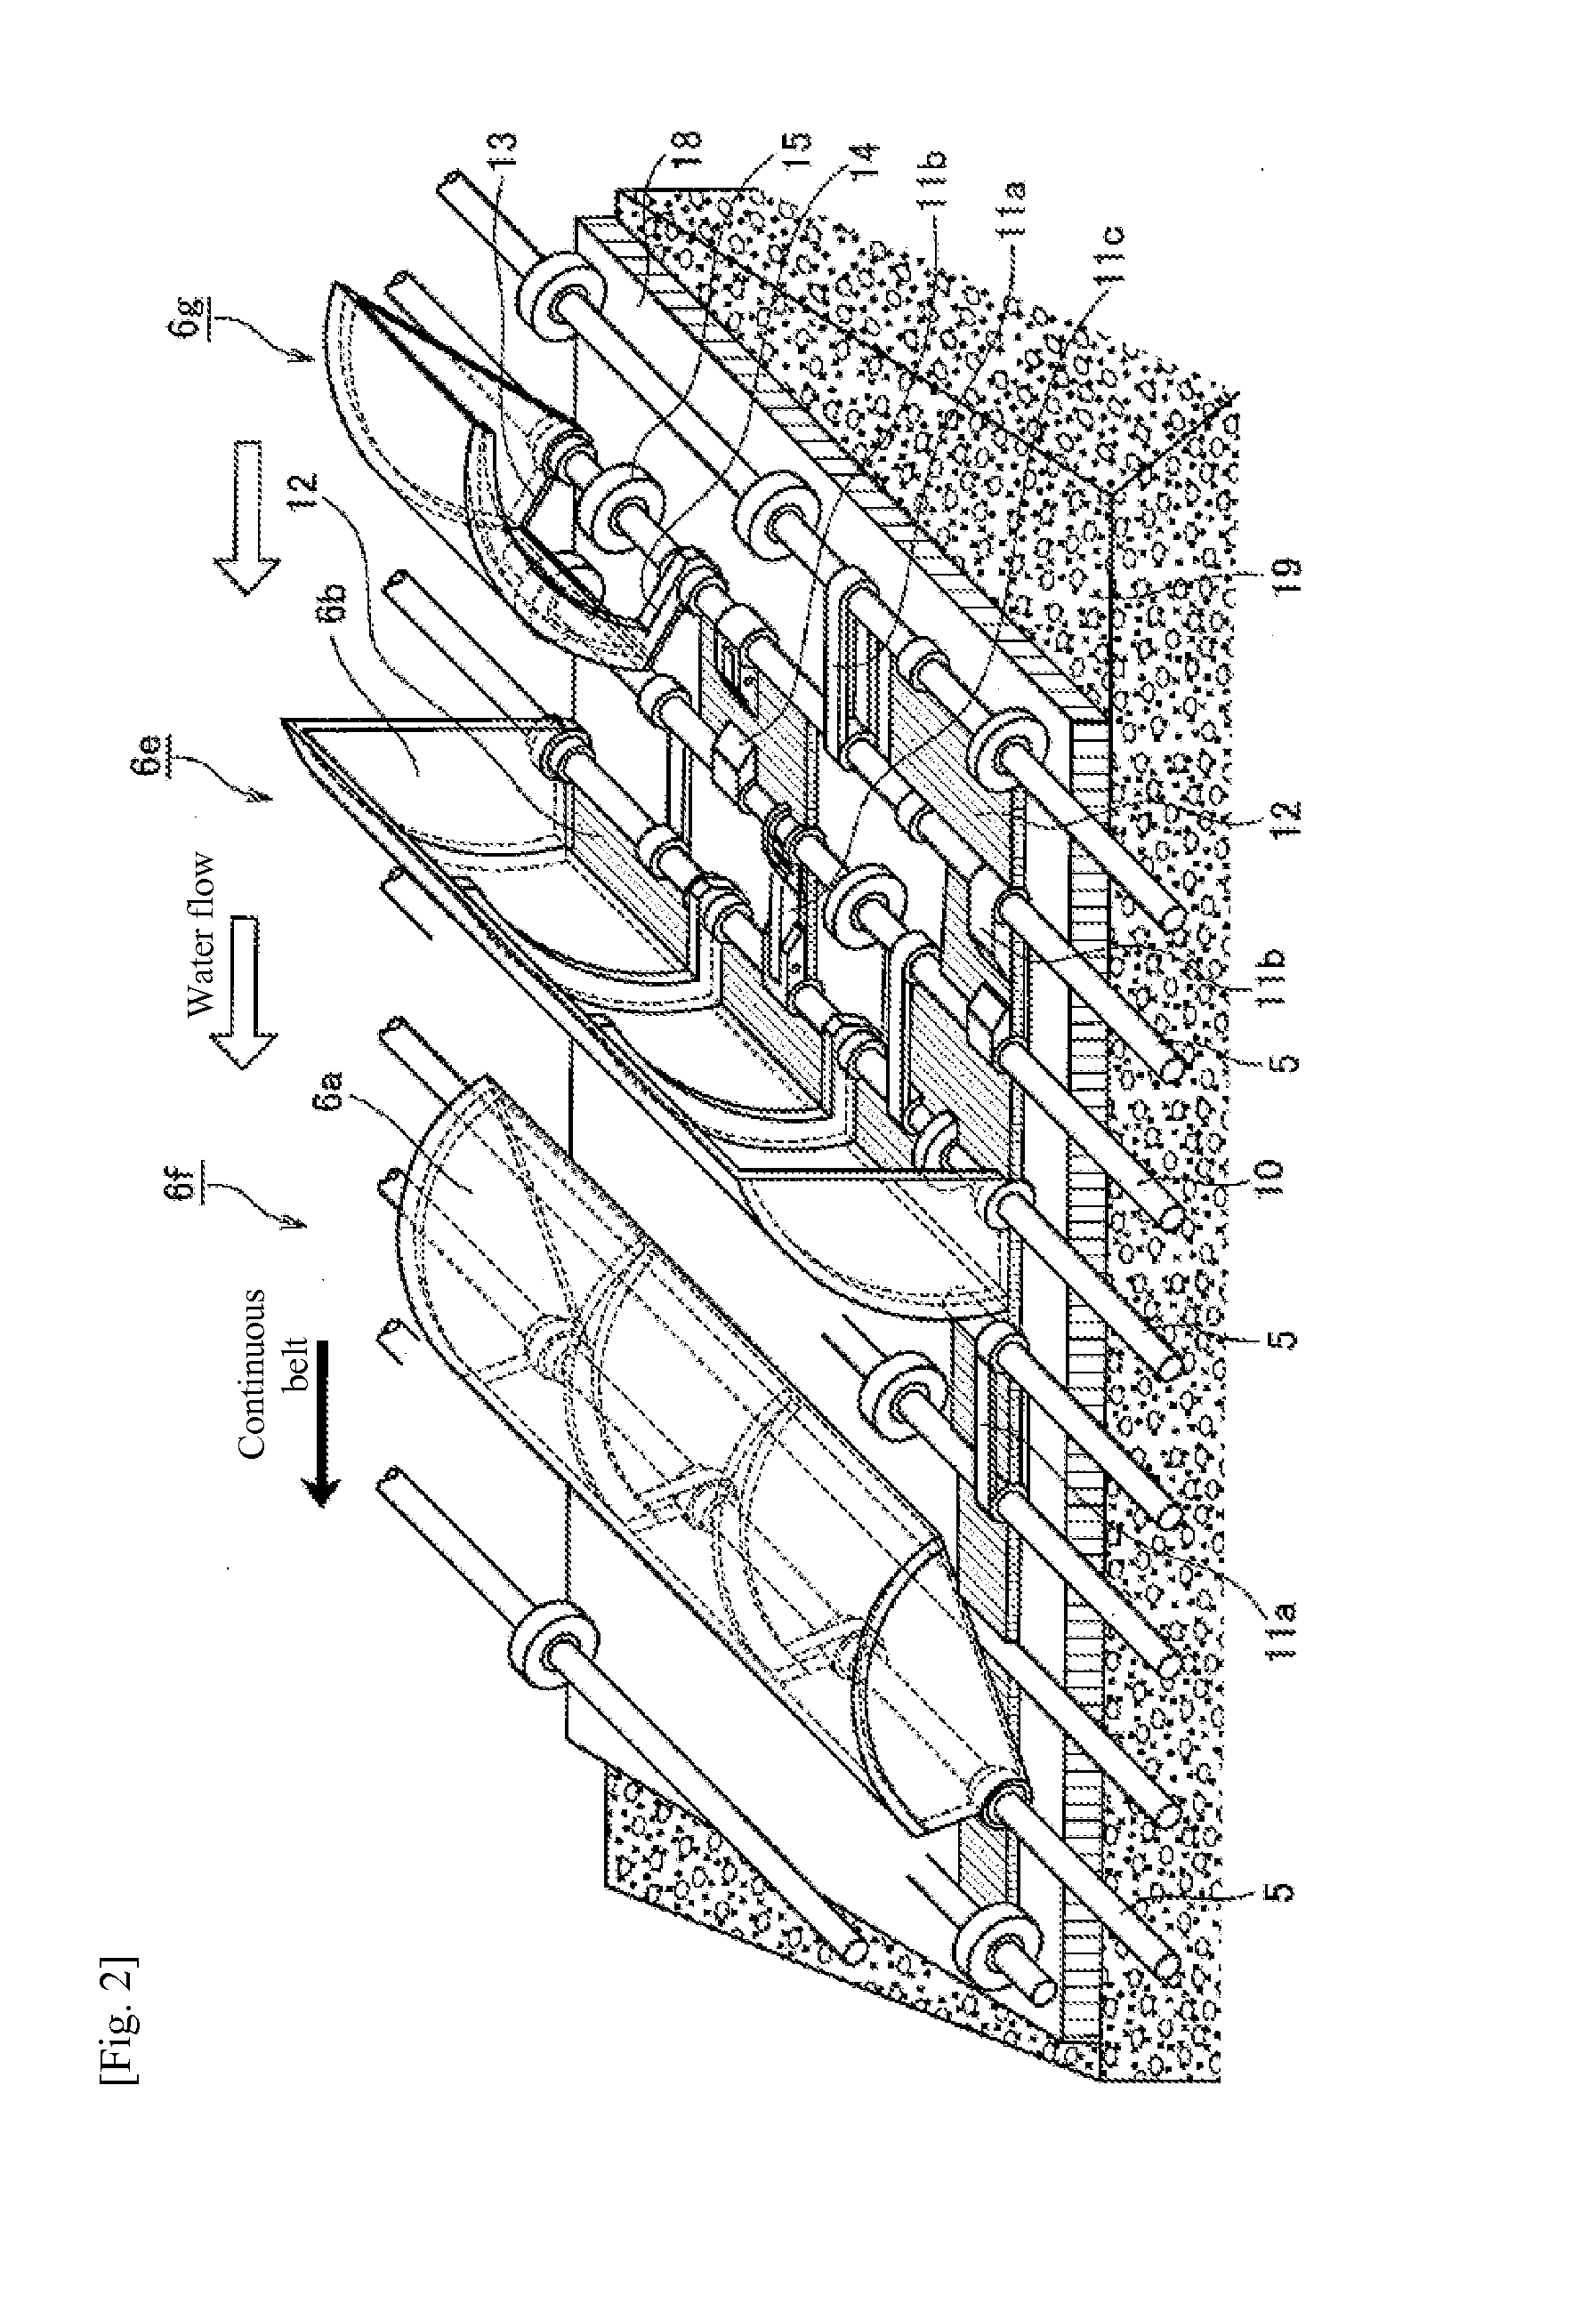 Bottomless-cup type water power conversion device utilizing flowing water energy